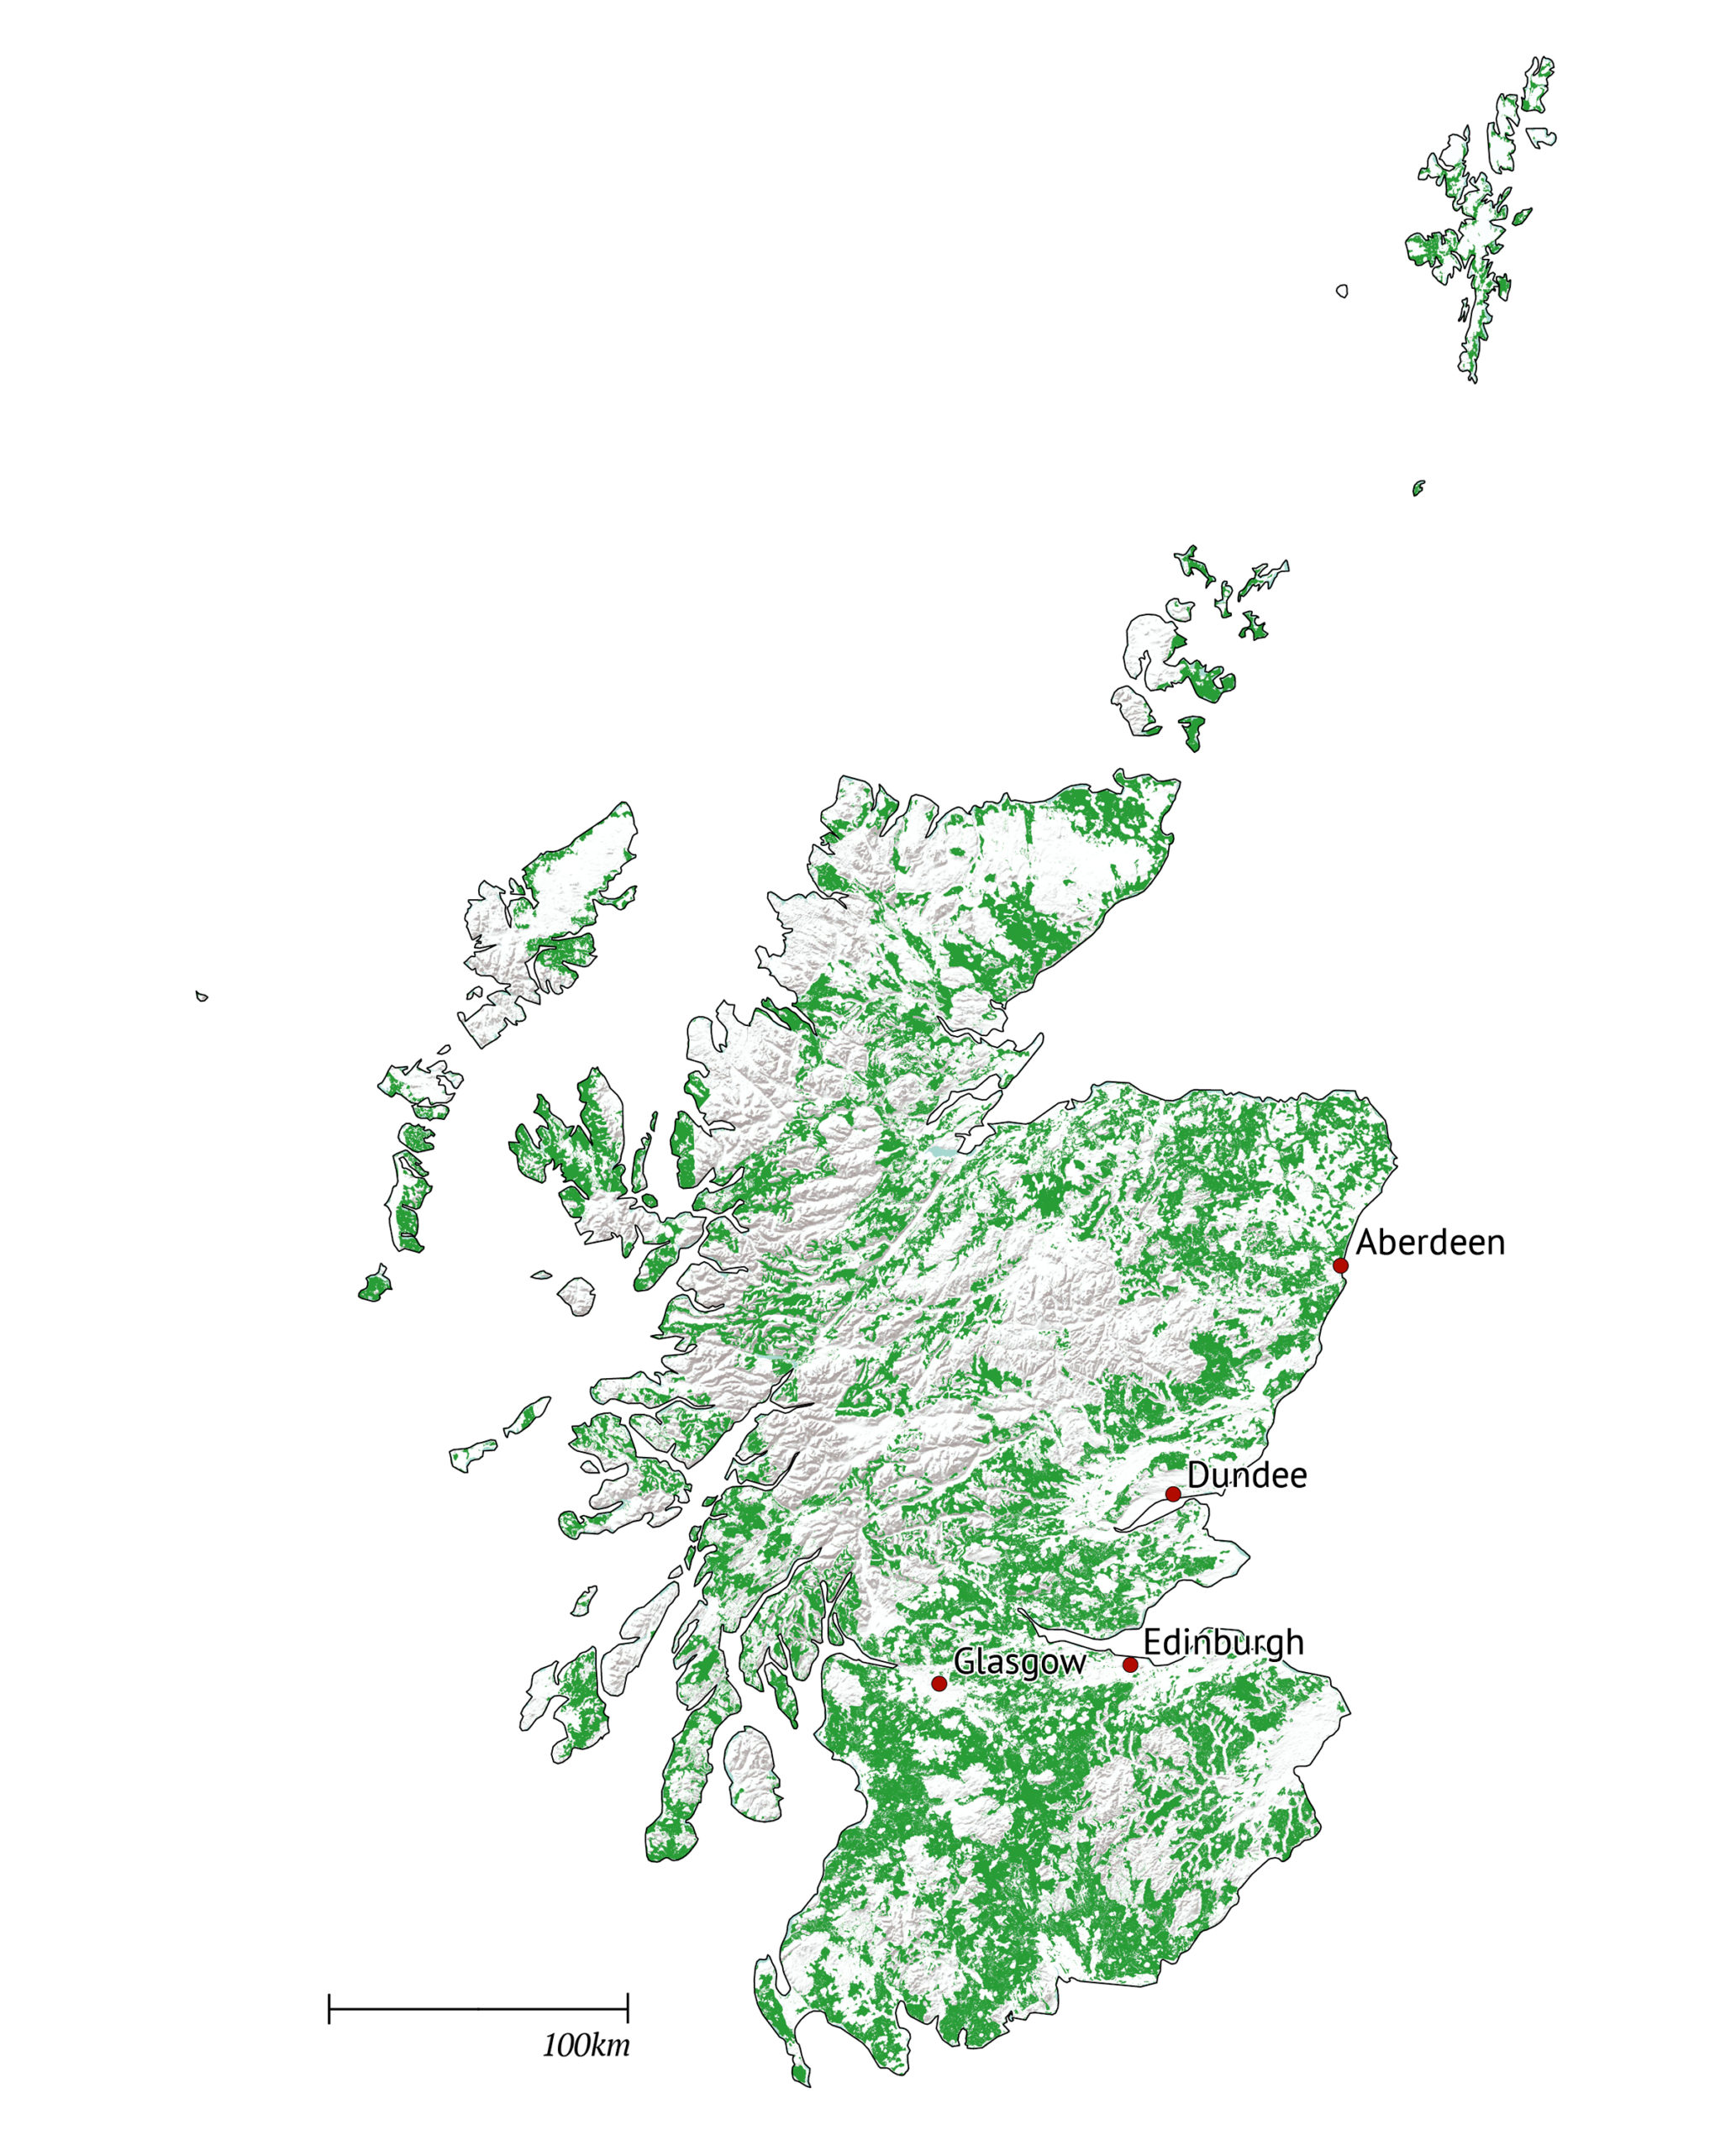 Map showing land in Scotland “most likely to have potential for woodland expansion” (green) in 2012, based on a three tiered approach developed by the James Hutton Institute and Forest Research for Scottish government. They identified 2.69m hectares (representing 34% of Scotland), taking into account the quality of land for agriculture, its suitability for woodland, the presence of priority habitats and the presence of deep peat which is unsuitable for woodland creation. Source: Woodland Expansion Advisory Group. Graphic by Carbon Brief.